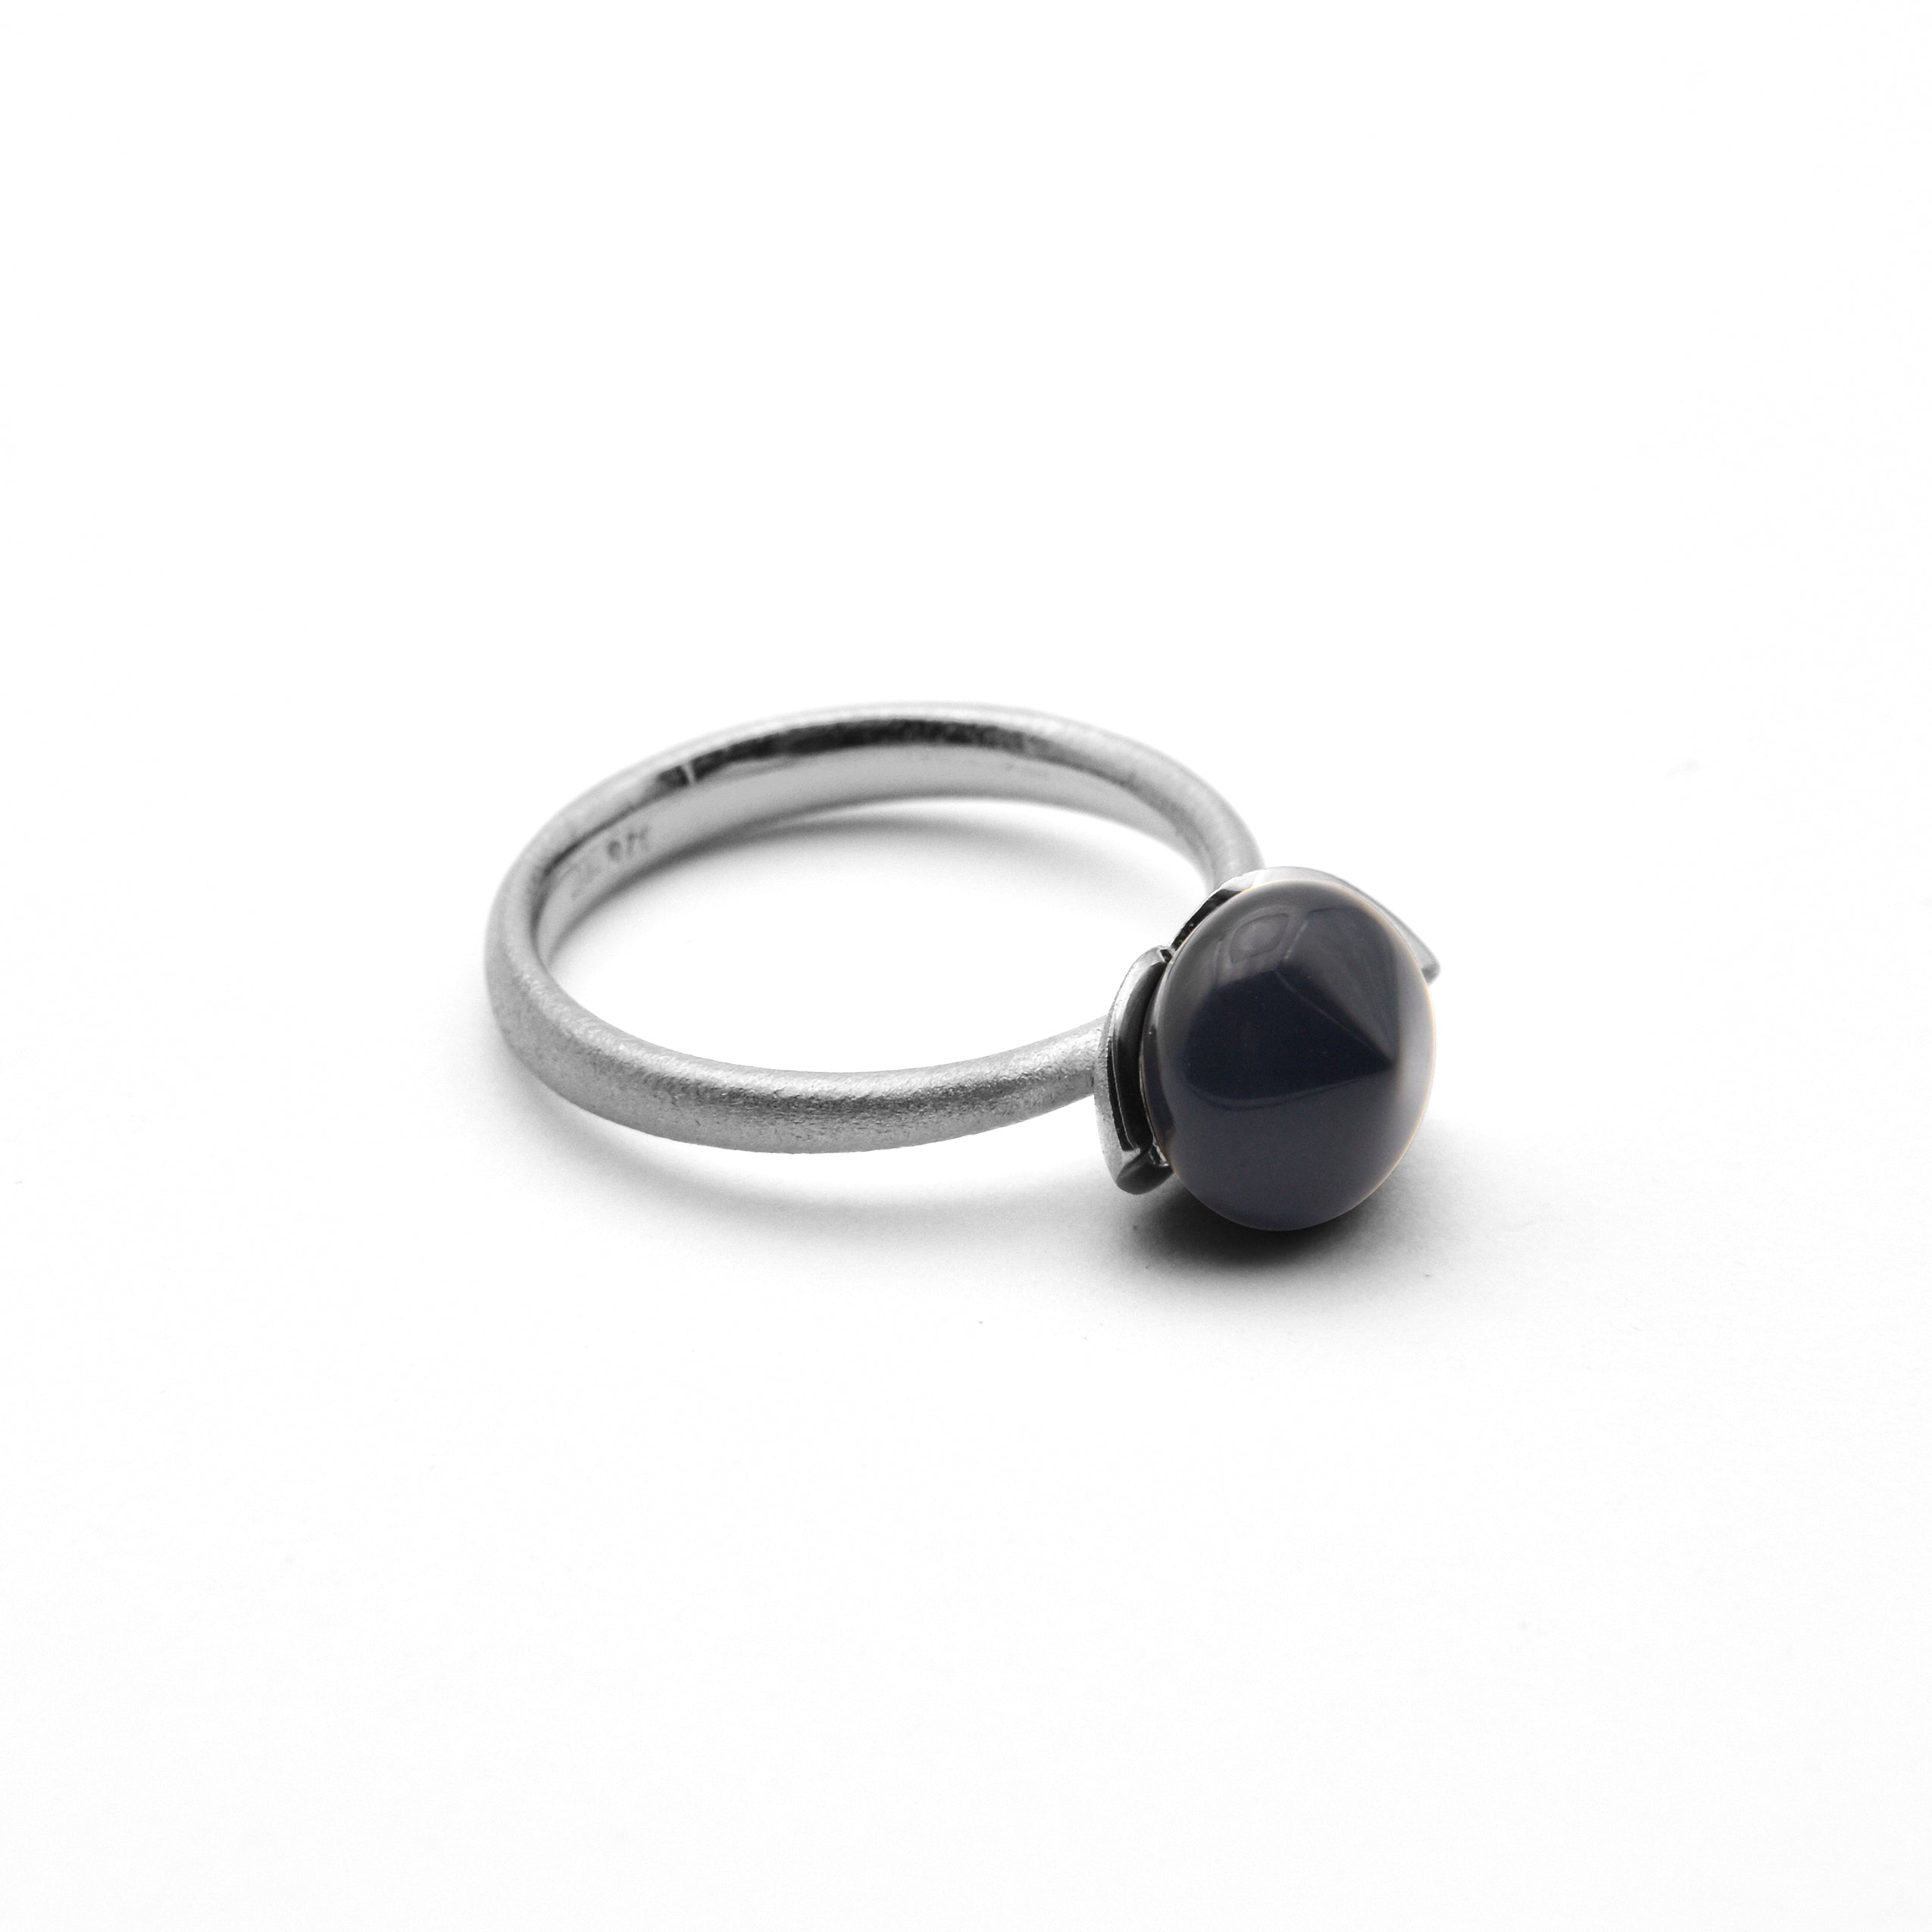 Dolce ring "smal" med onix 925/-